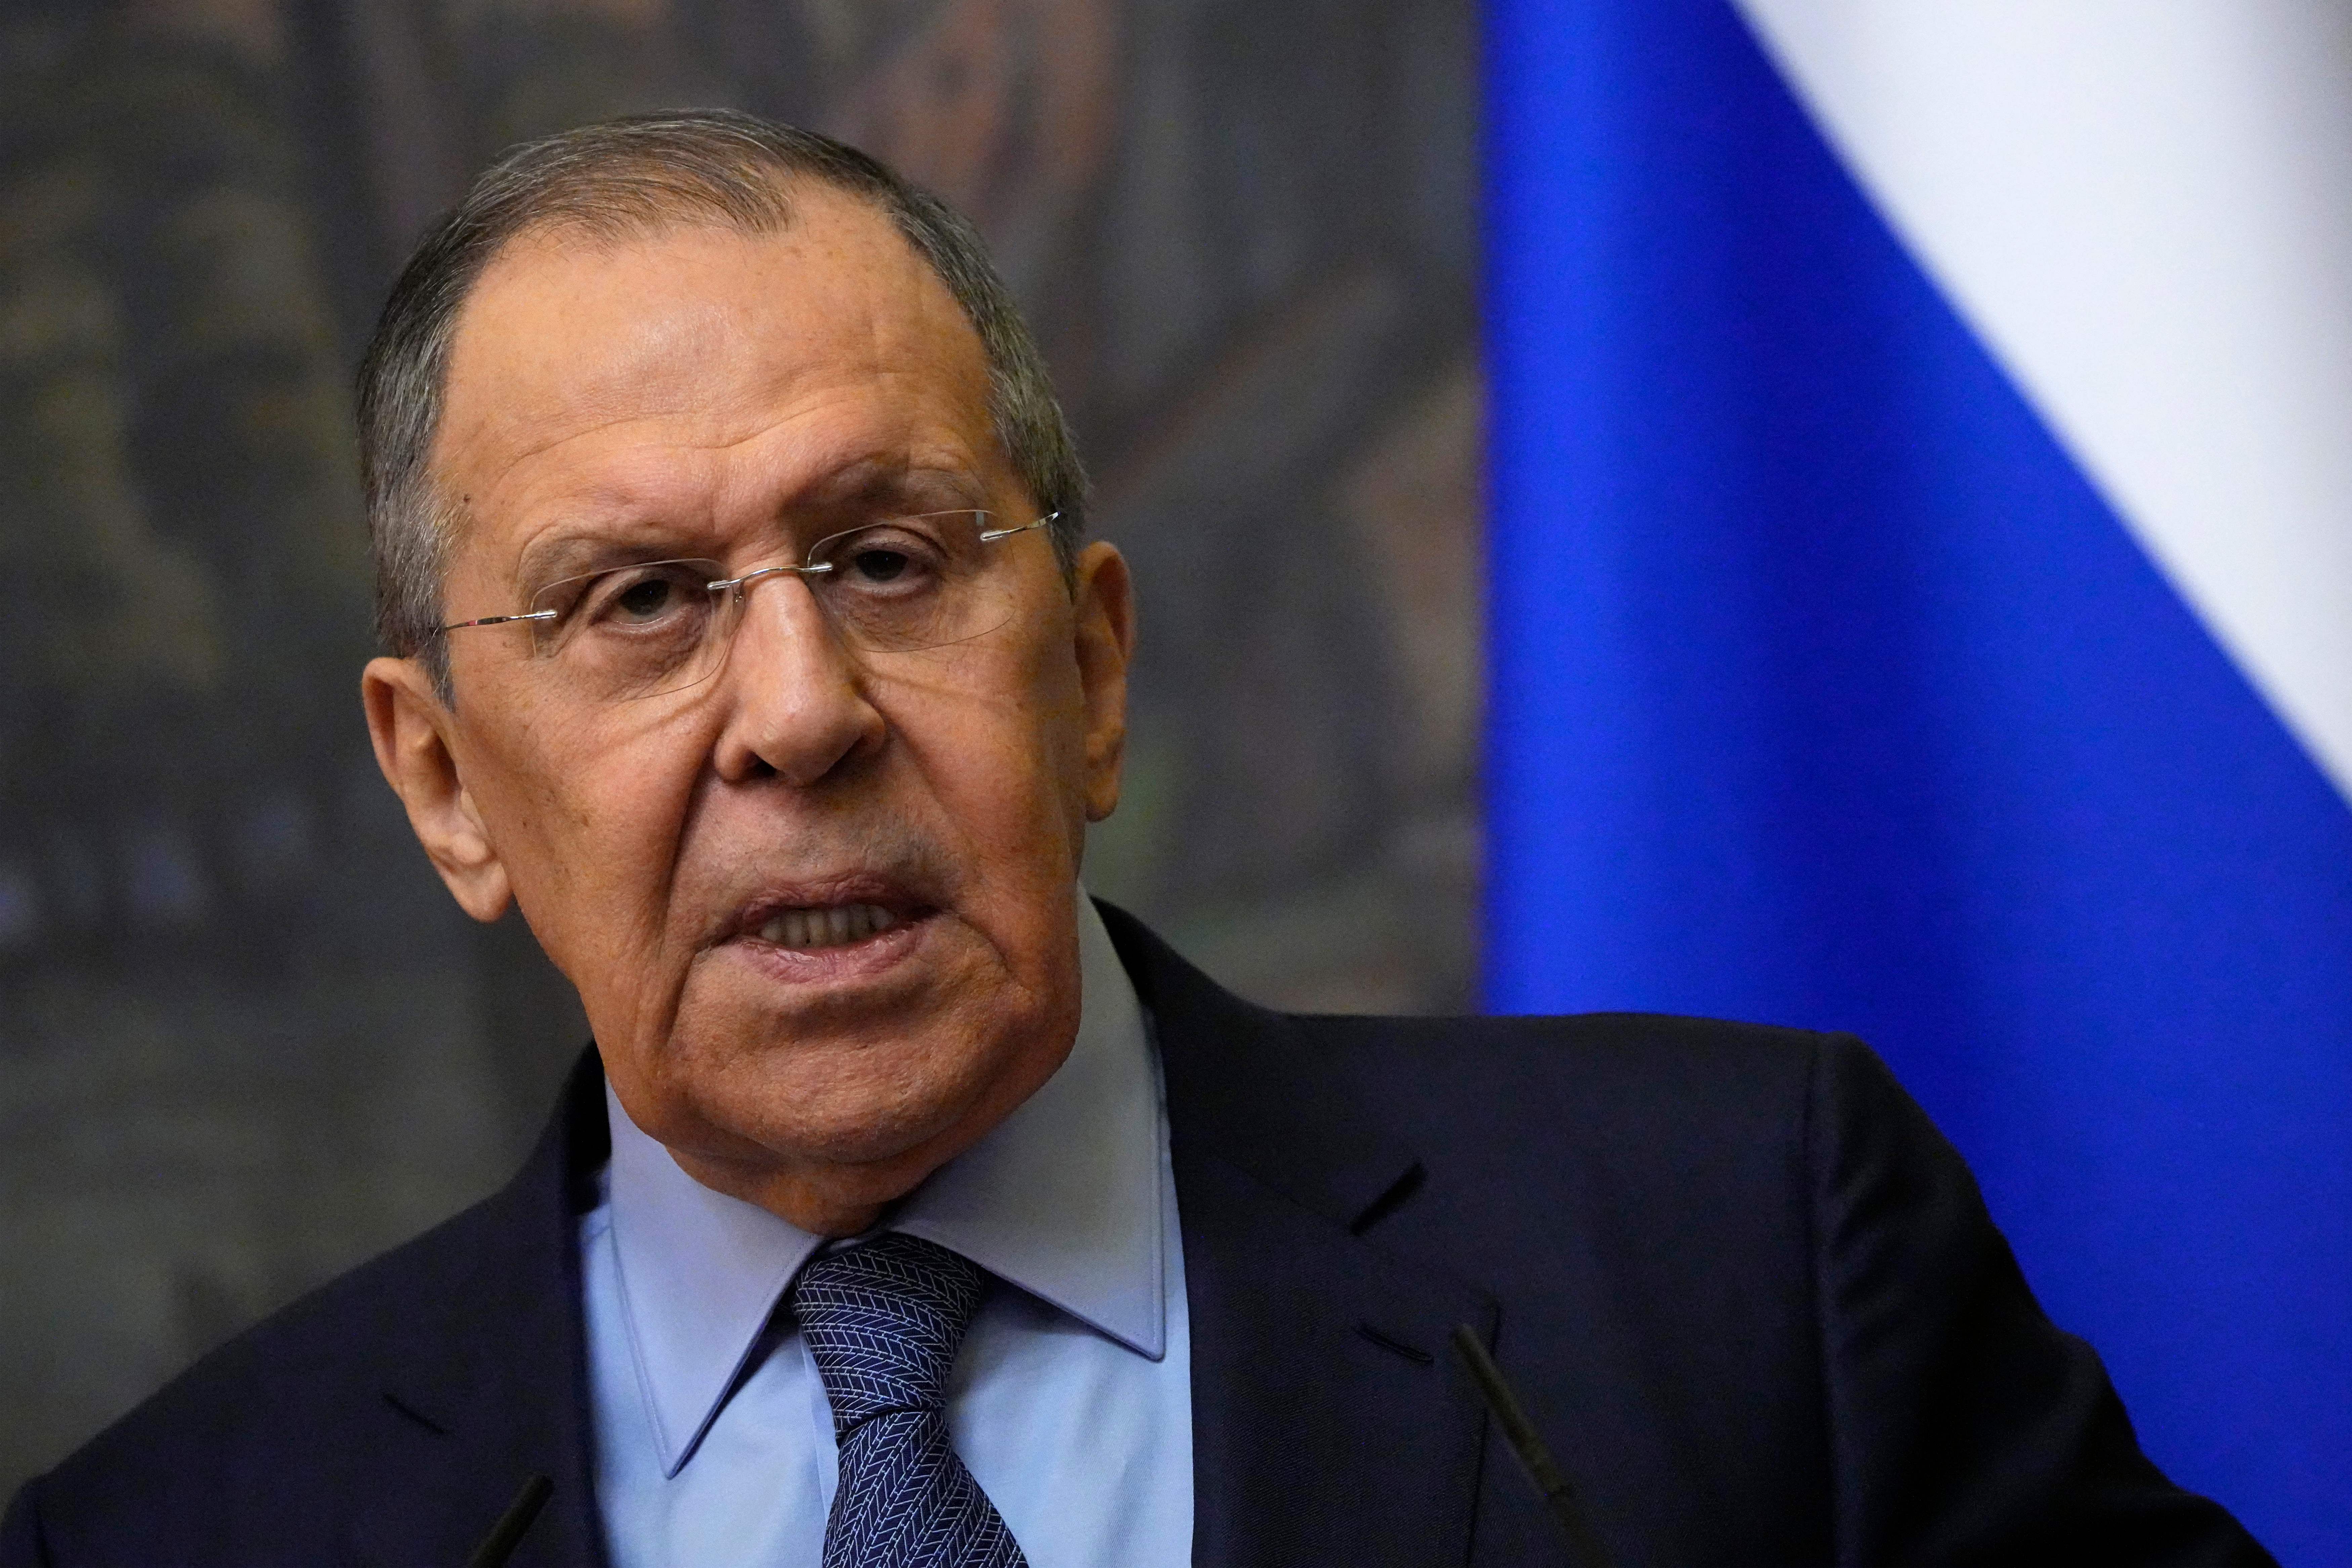 Russian Foreign Minister Sergey Lavrov speaks during a press conference in Moscow, Russia, on April 7.